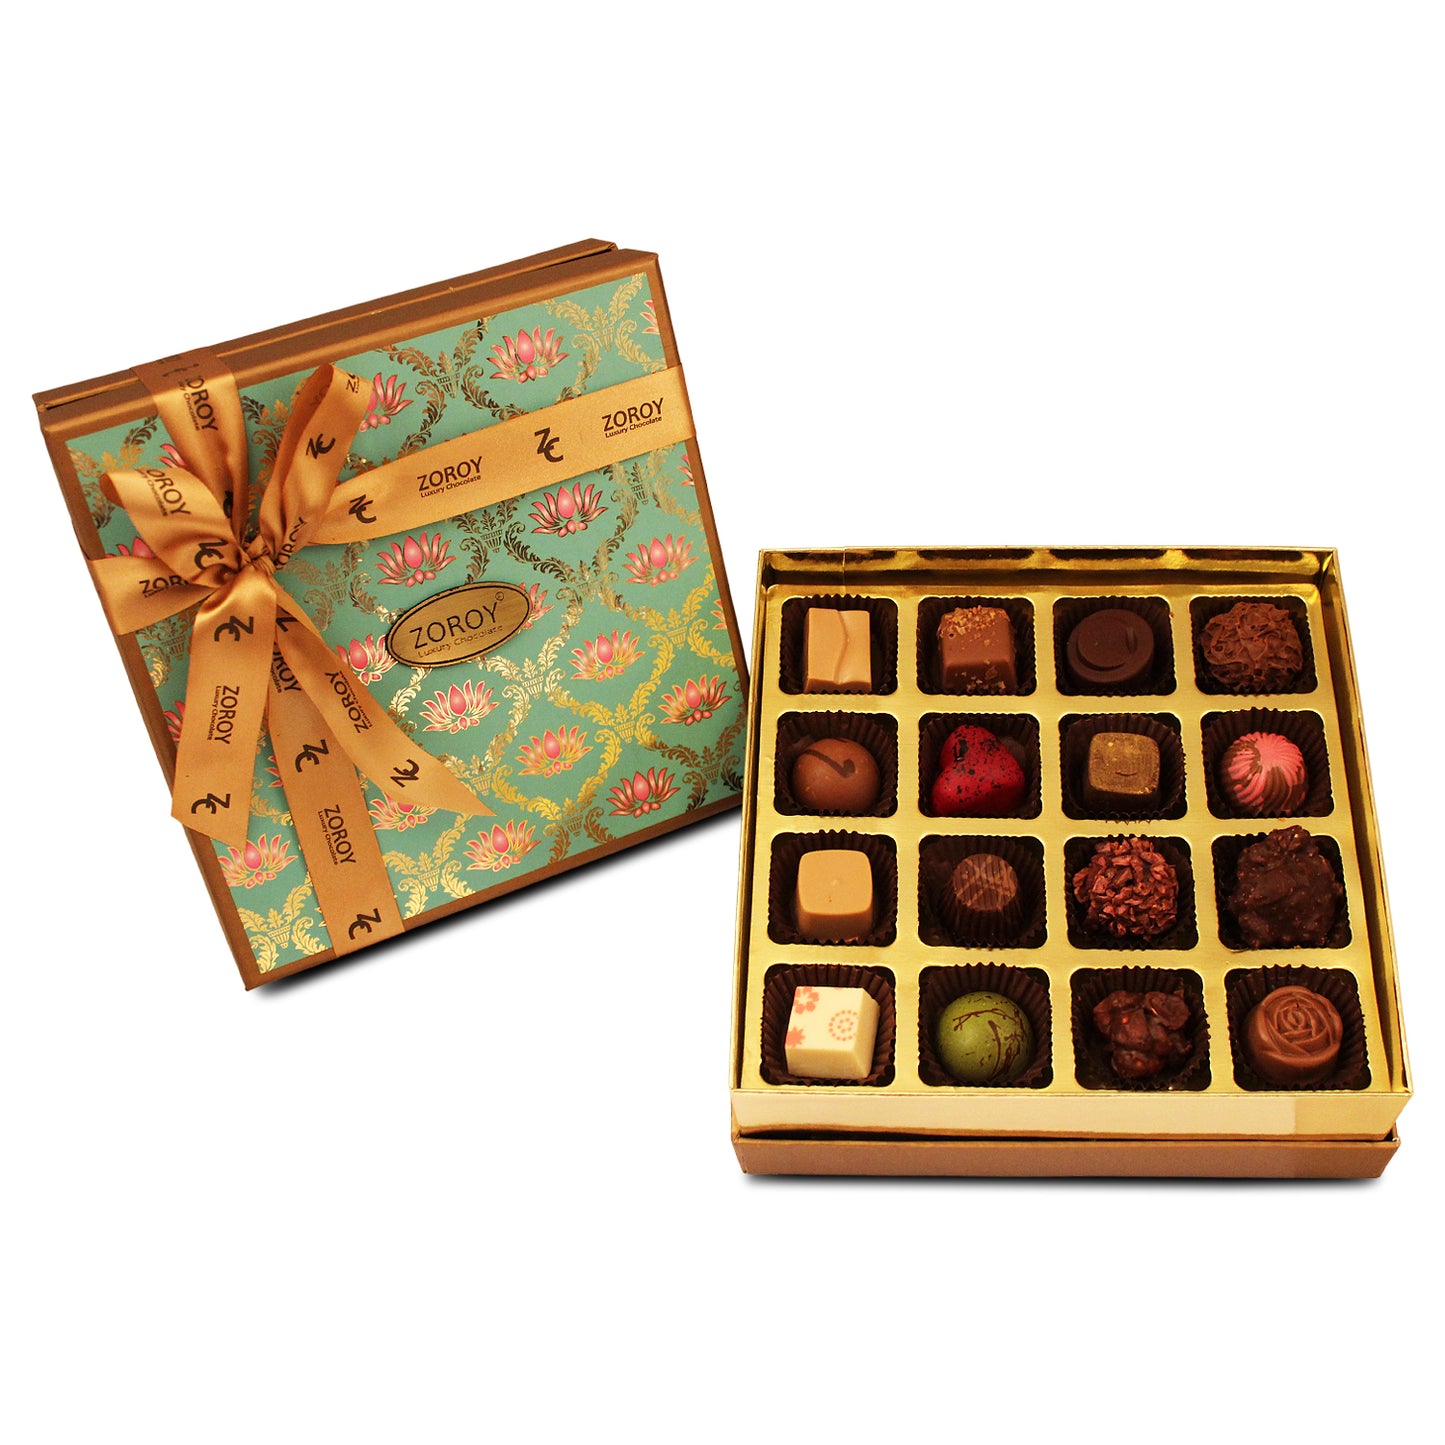 ZOROY LUXURY CHOCOLATE Box of 16 Pure Couverture Chocolate